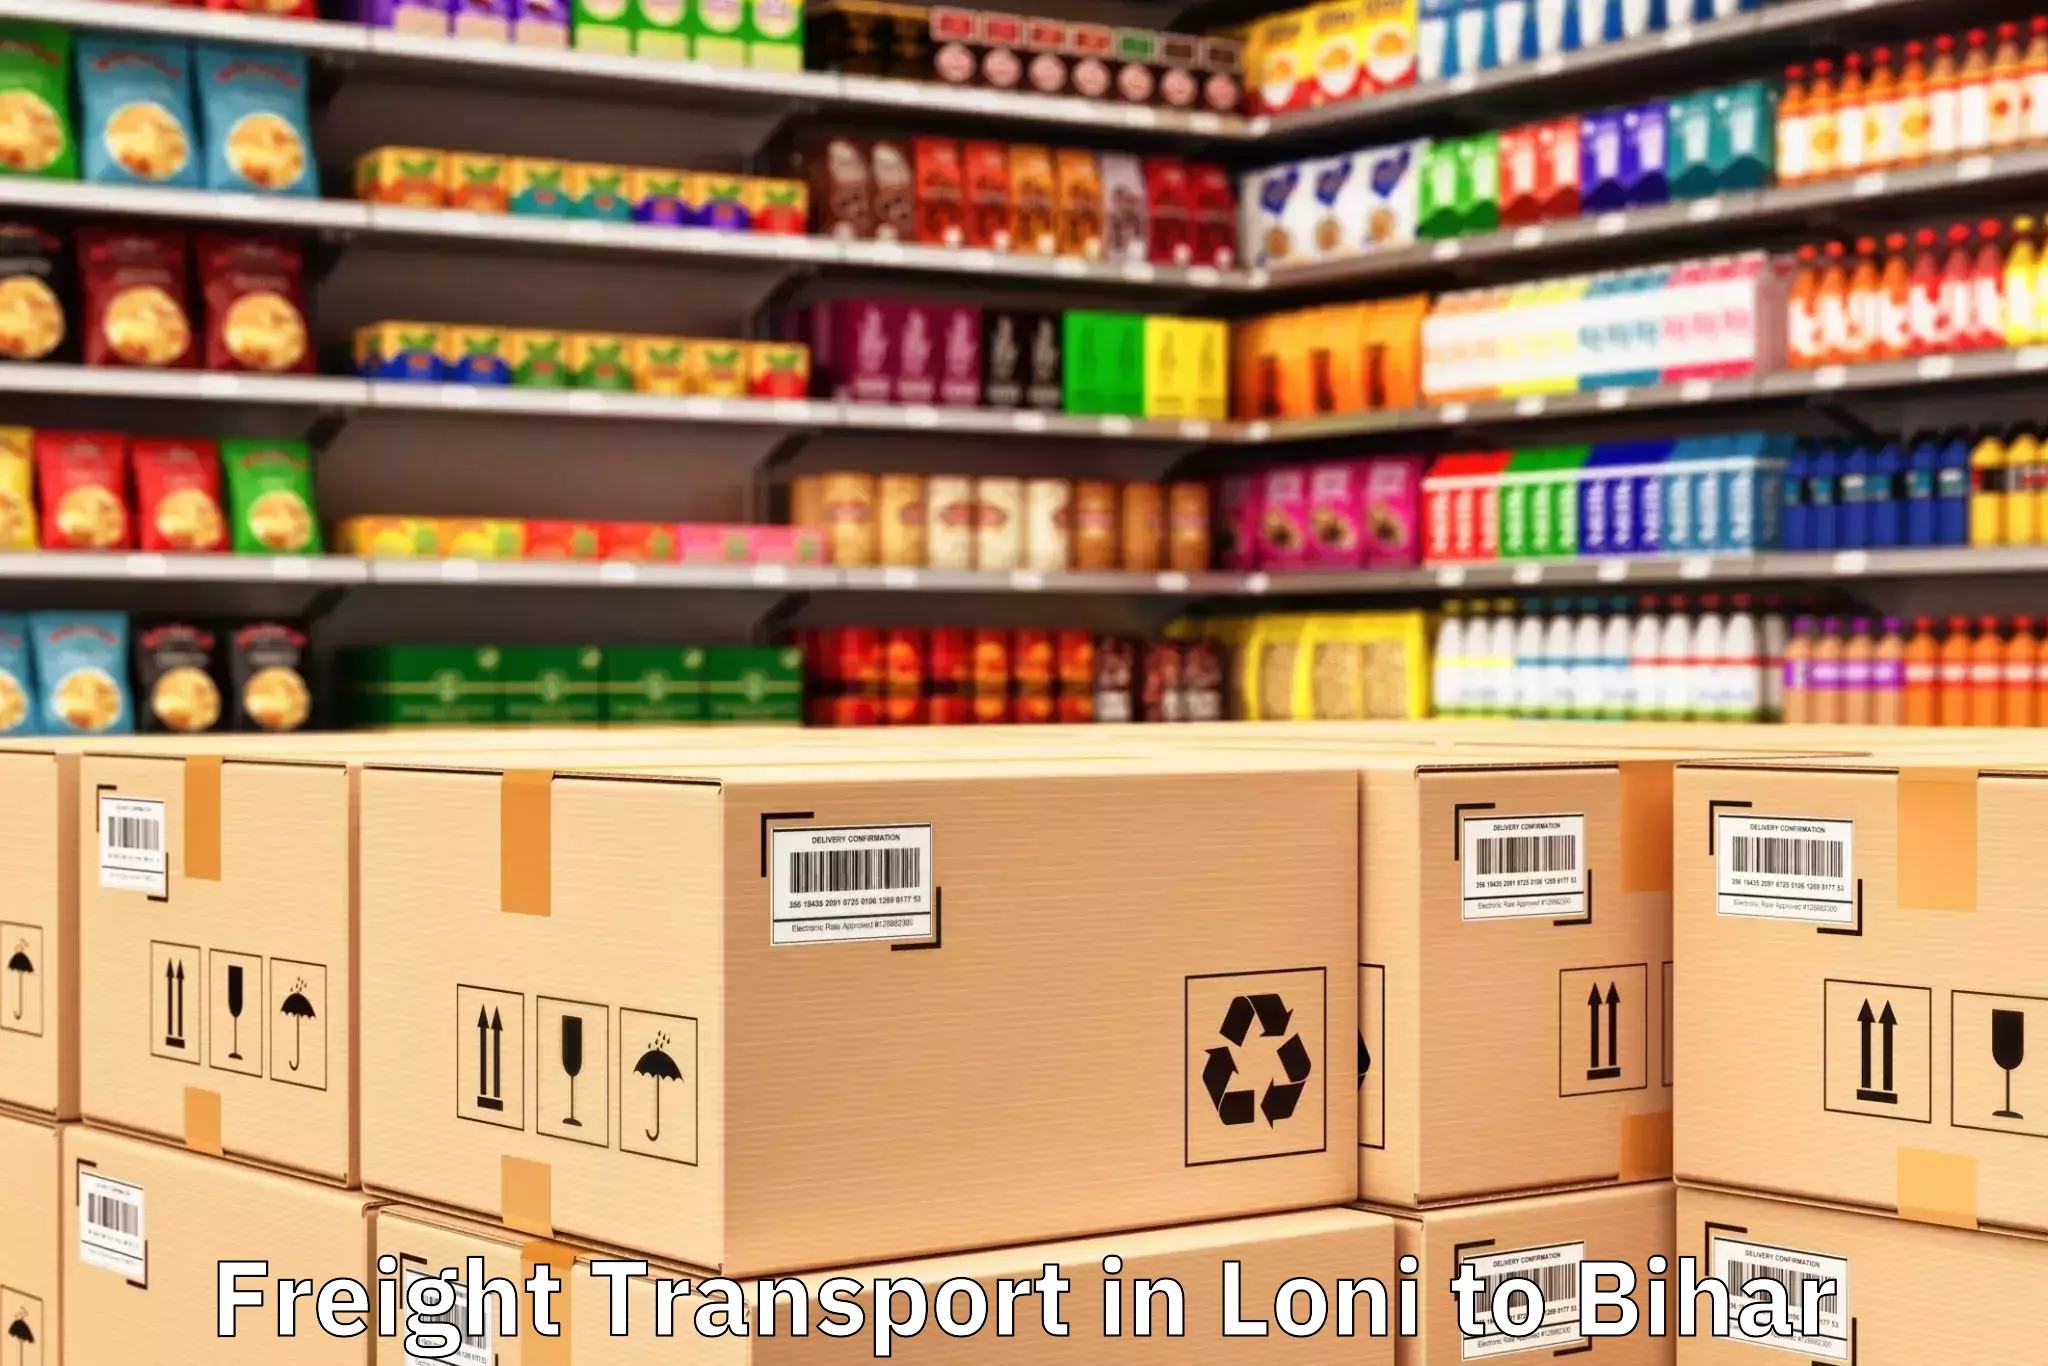 Professional Loni to Agiaon Freight Transport